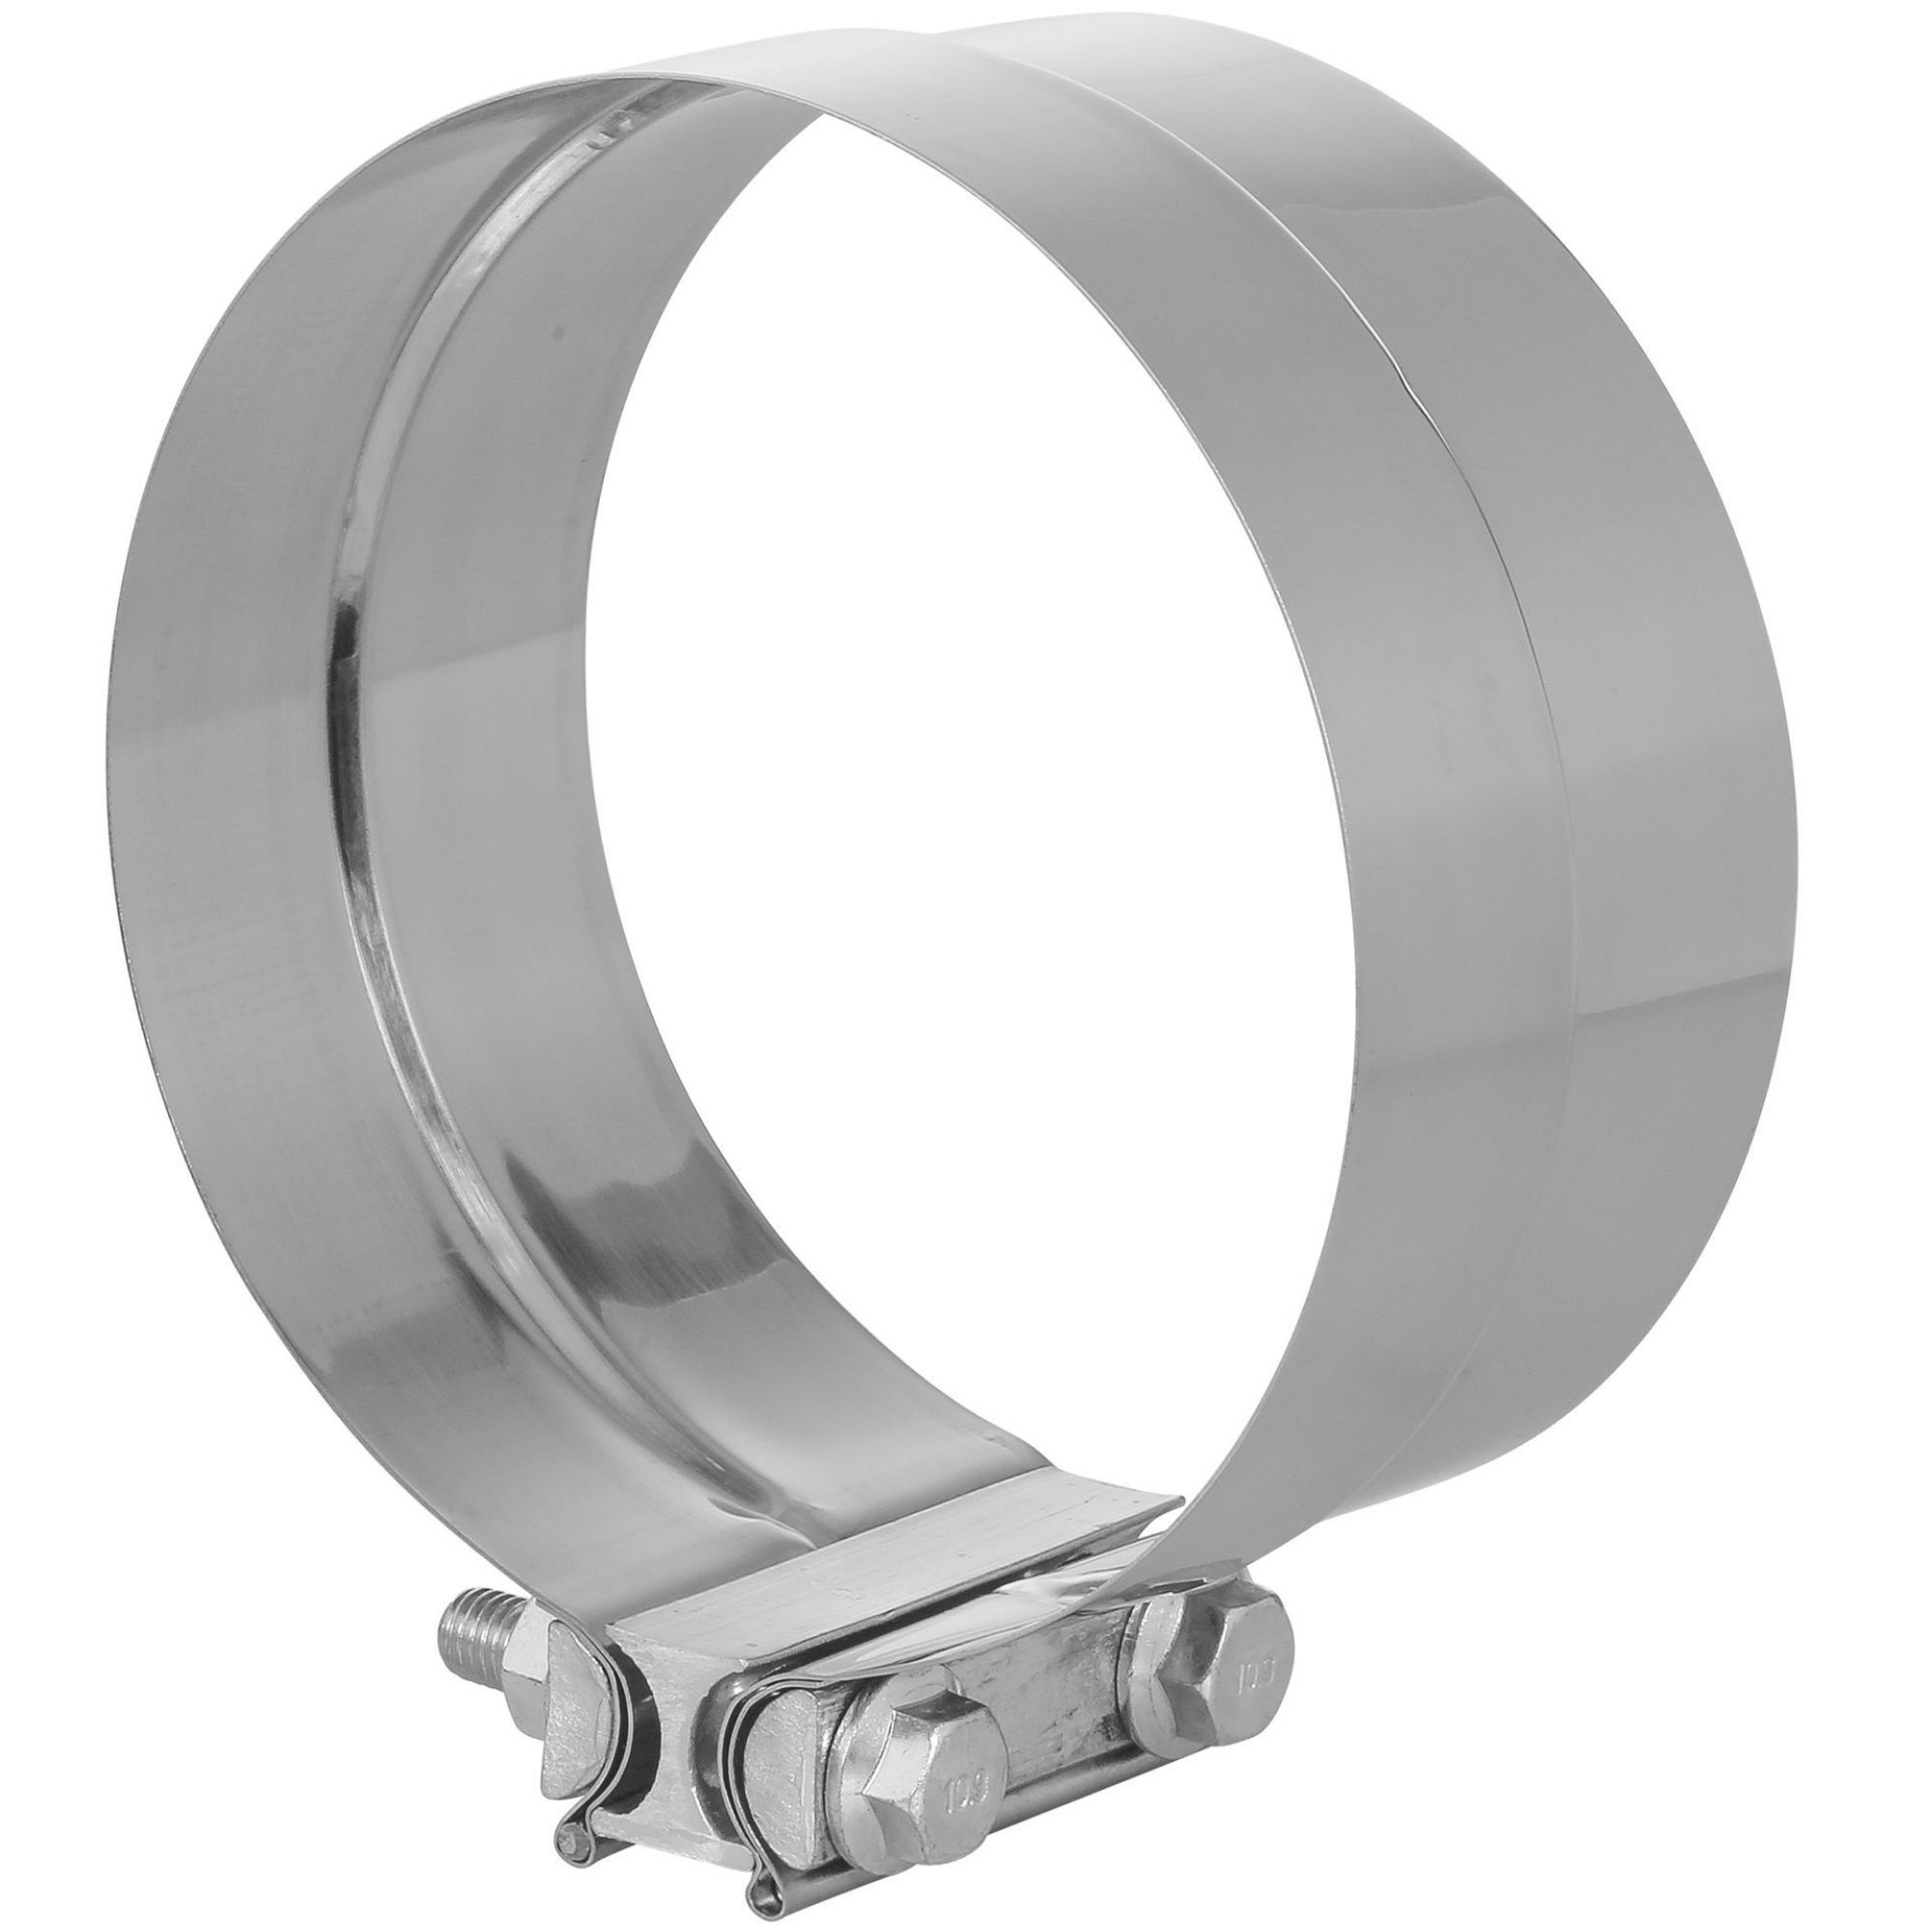 TOTALFLOW TF-J65 Lap Joint Exhaust Muffler Clamp Band | 6 Inch